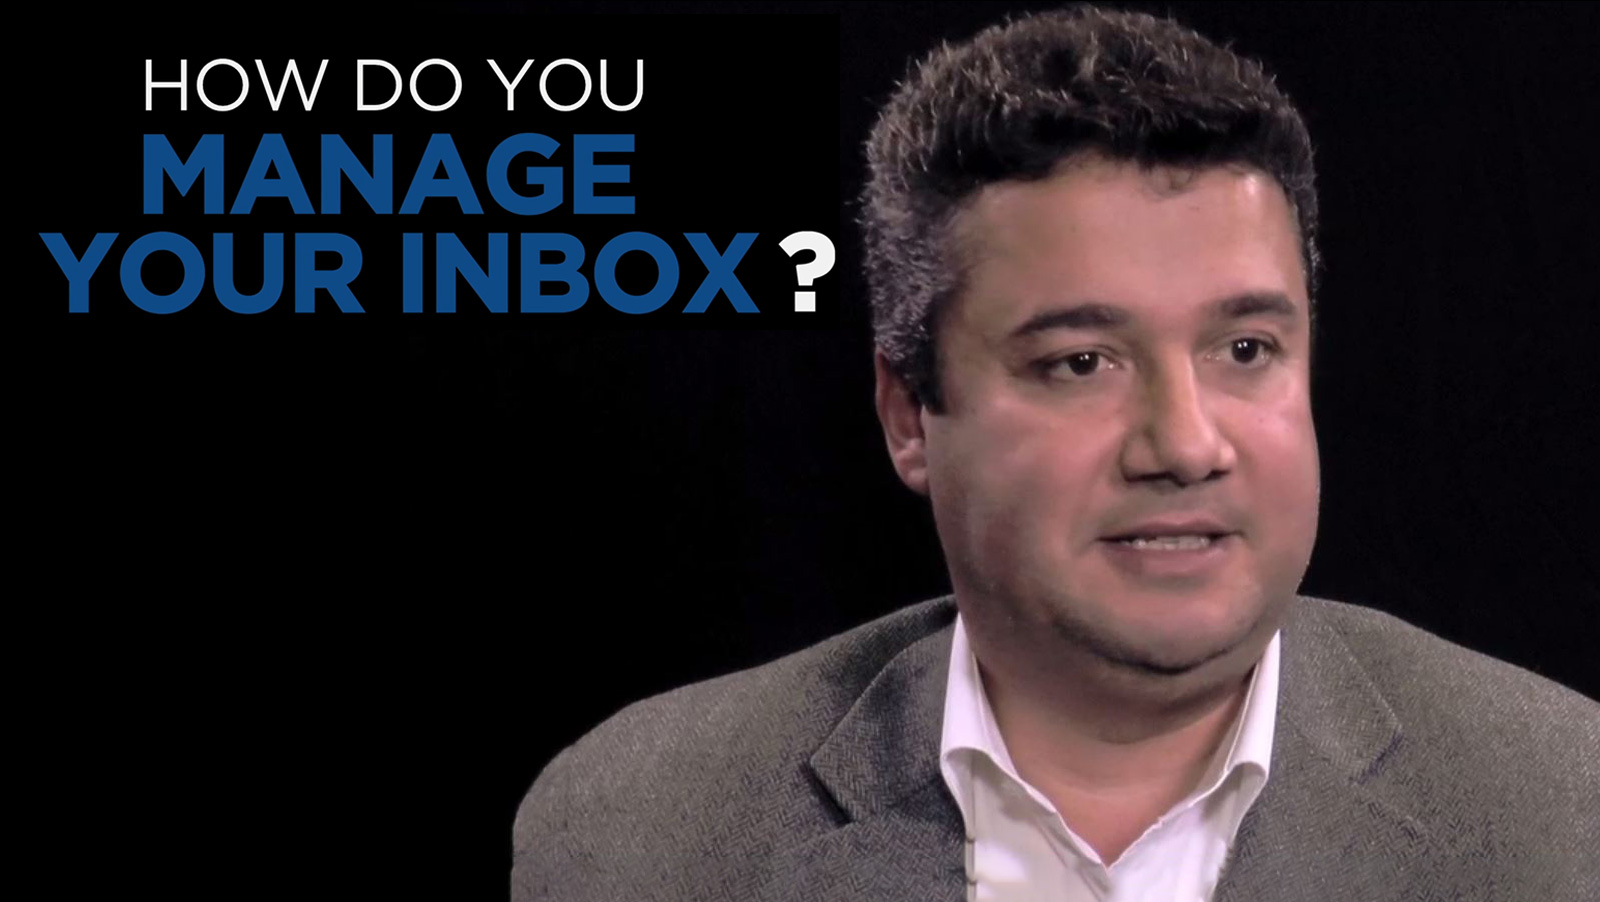 Hussein Chahine: Shared Experience - How do you manage your inbox?